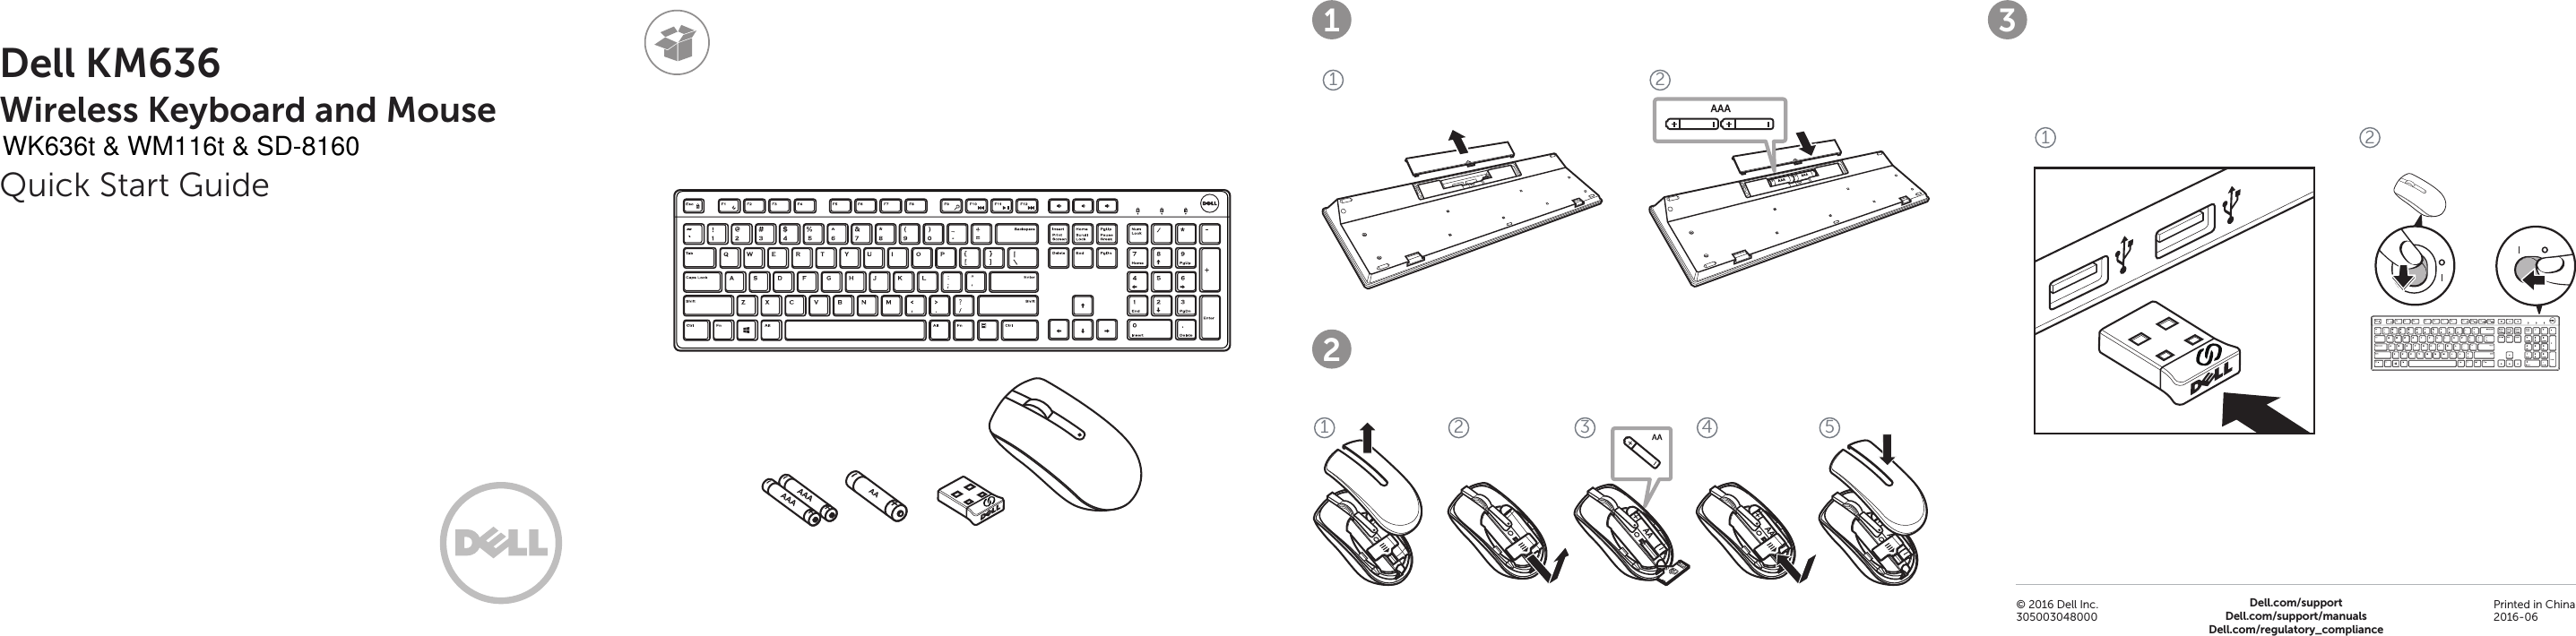 Dell KM636  Wireless Keyboard and MouseQuick Start Guide1 21 234512Dell.com/supportDell.com/support/manualsDell.com/regulatory_compliance© 2016 Dell Inc.305003048000Printed in China2016-061 23WK636t &amp; WM116t &amp; SD-8160